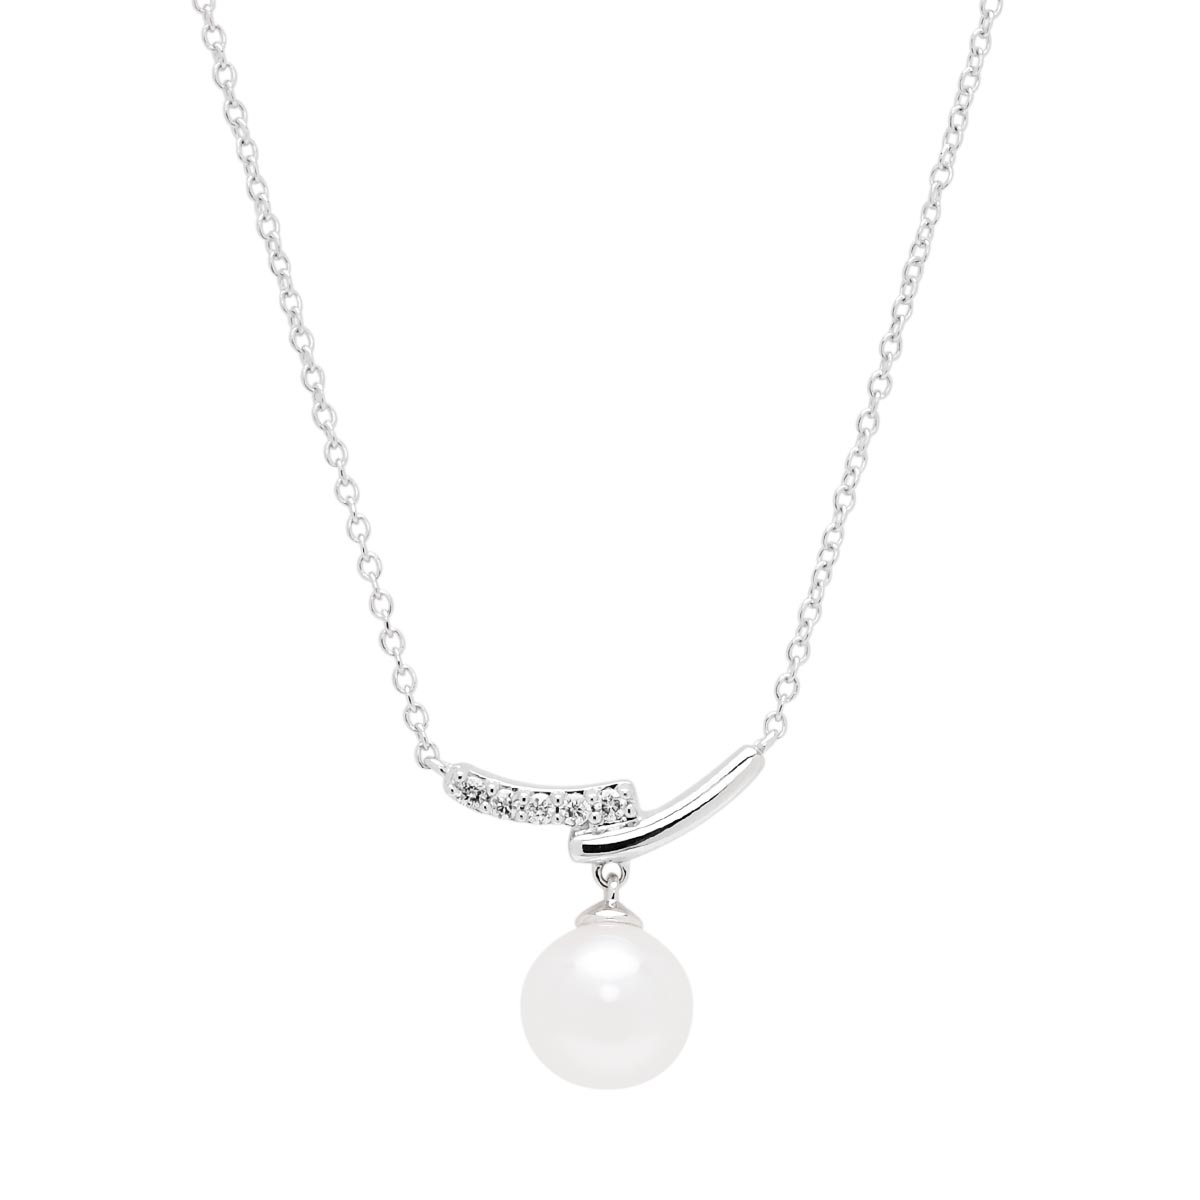 Mastoloni Cultured Freshwater Pearl Necklace in 14kt White Gold with Diamonds (.04ct tw and 6.5-7mm pearl)